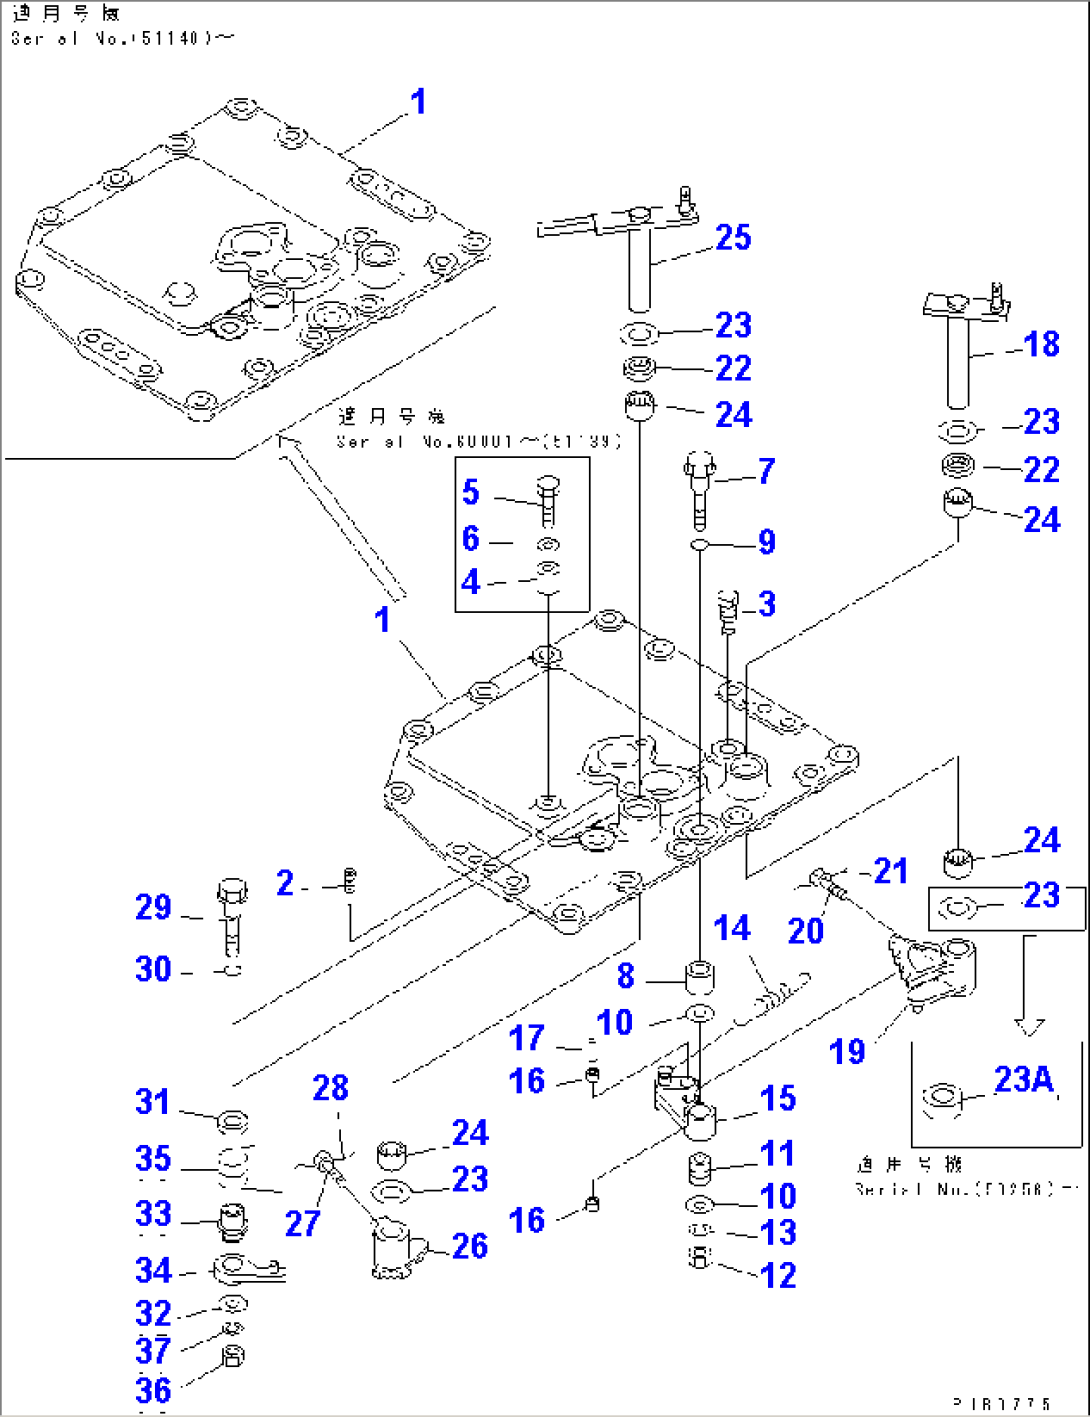 TRANSMISSION (CONTROL VALVE COVER AND LEVER)